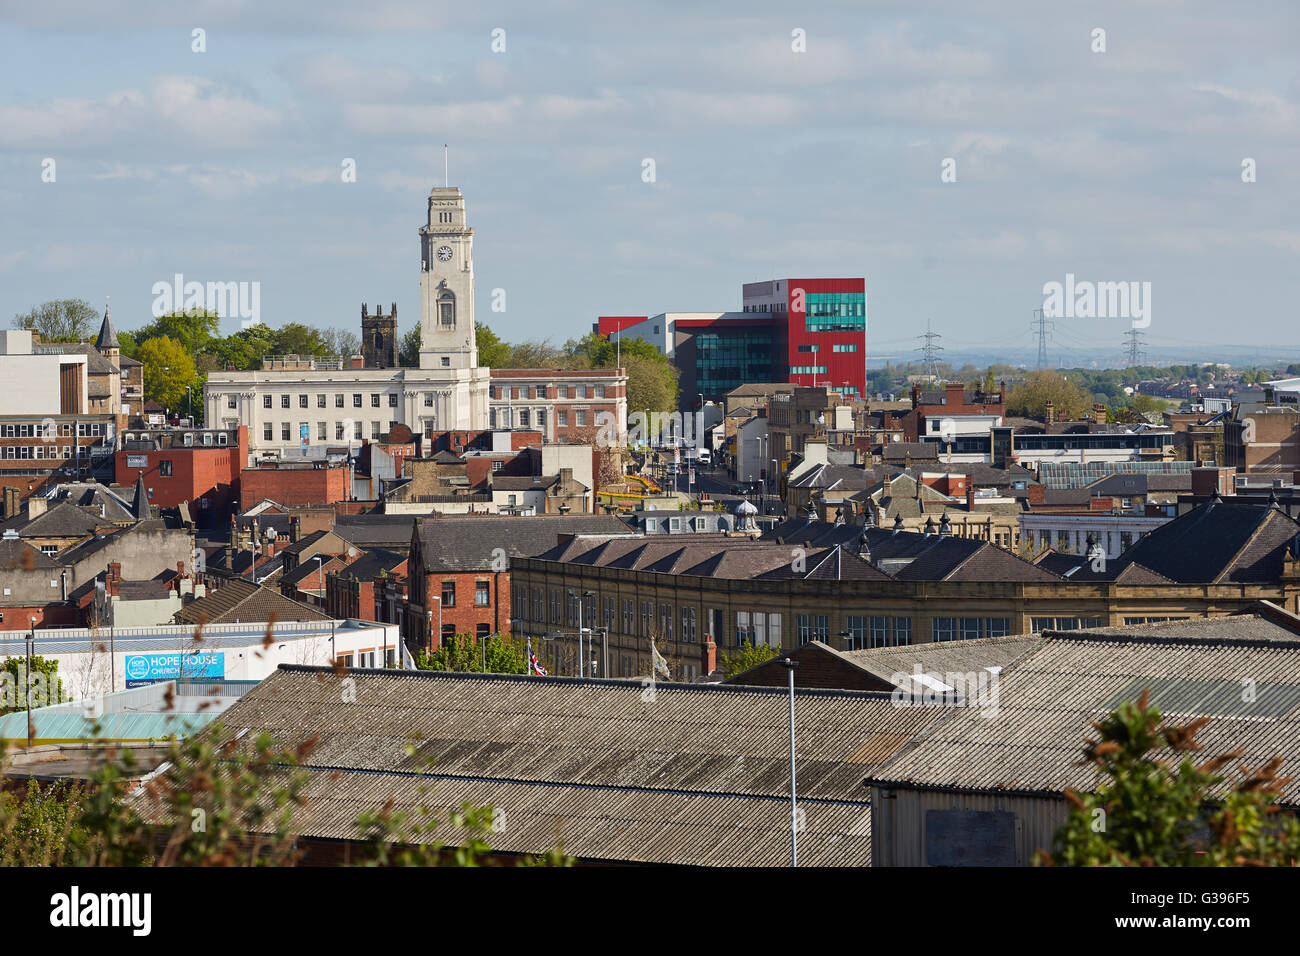 barnsley town centre   Barnsley Town Hall the Metropolitan Borough of Barnsley on the skyline from above looking down It bears m Stock Photo